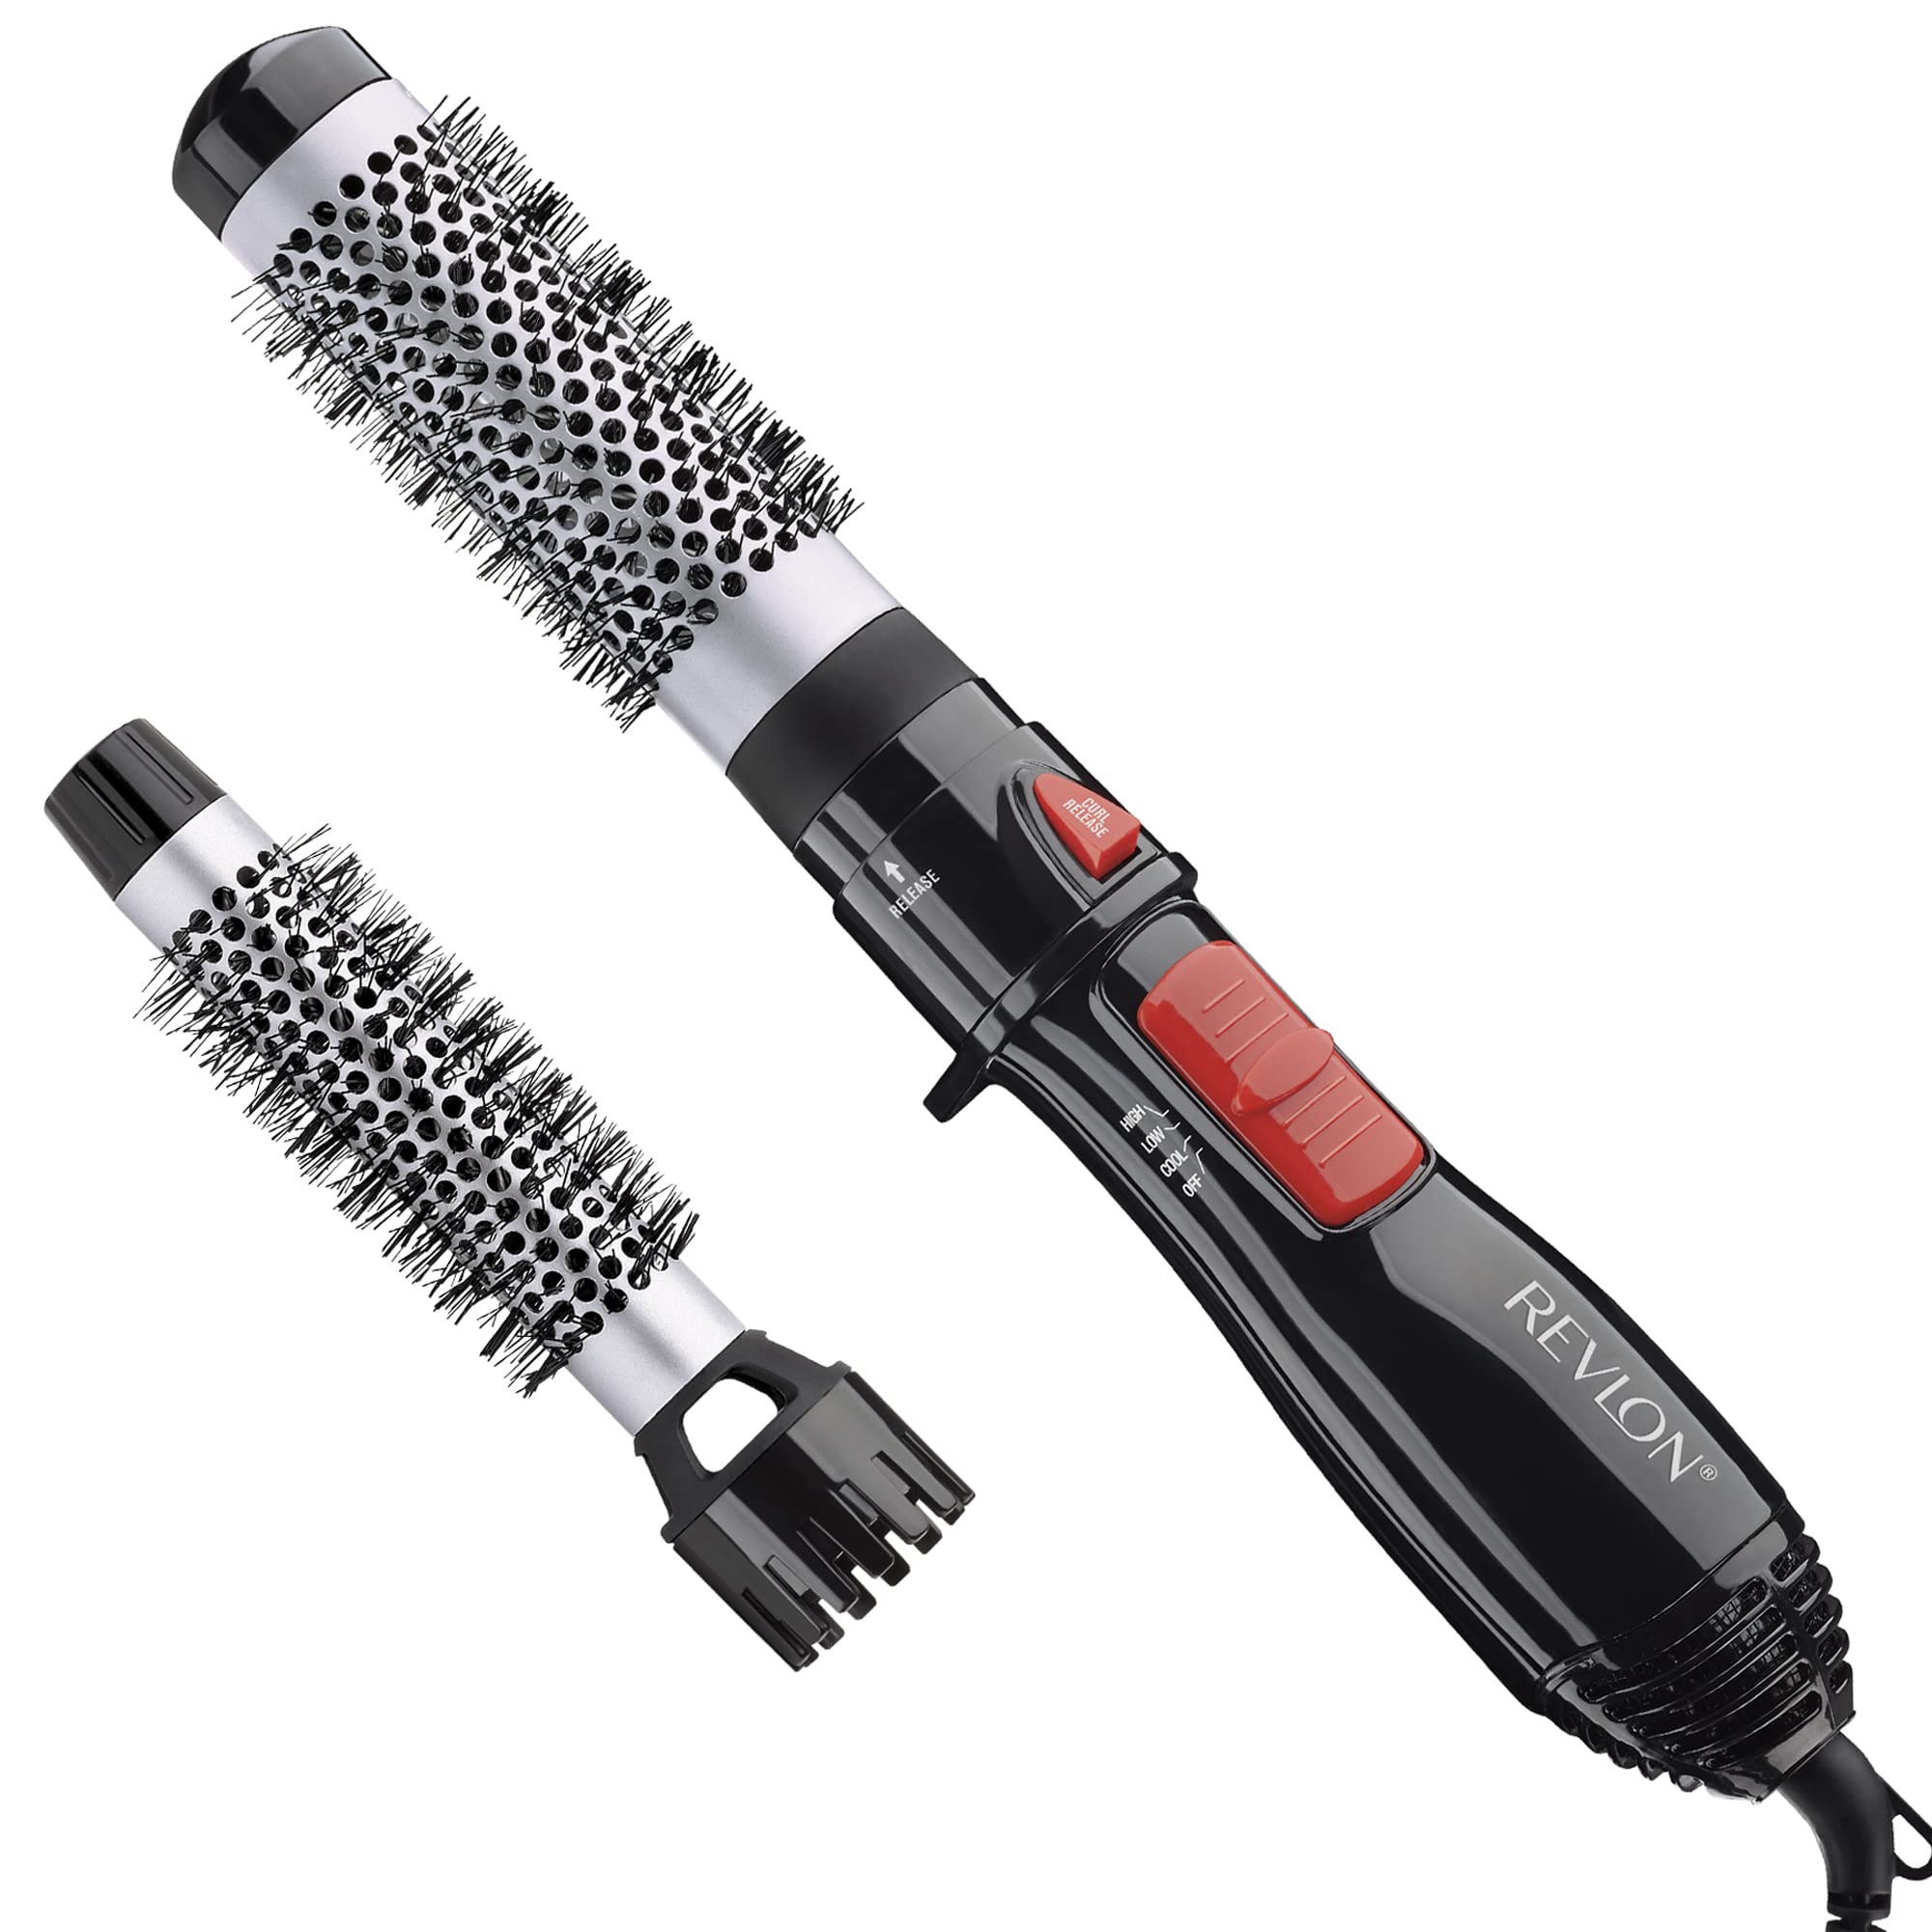 Revlon One Step Root Booster Round Brush Dryer and Hair Styler | Fight Frizz and Add Volume, (1-1/2 in) & All-in-One Style Hot Air Kit | Curl and Volumize Hair, Salon-Styled Finish